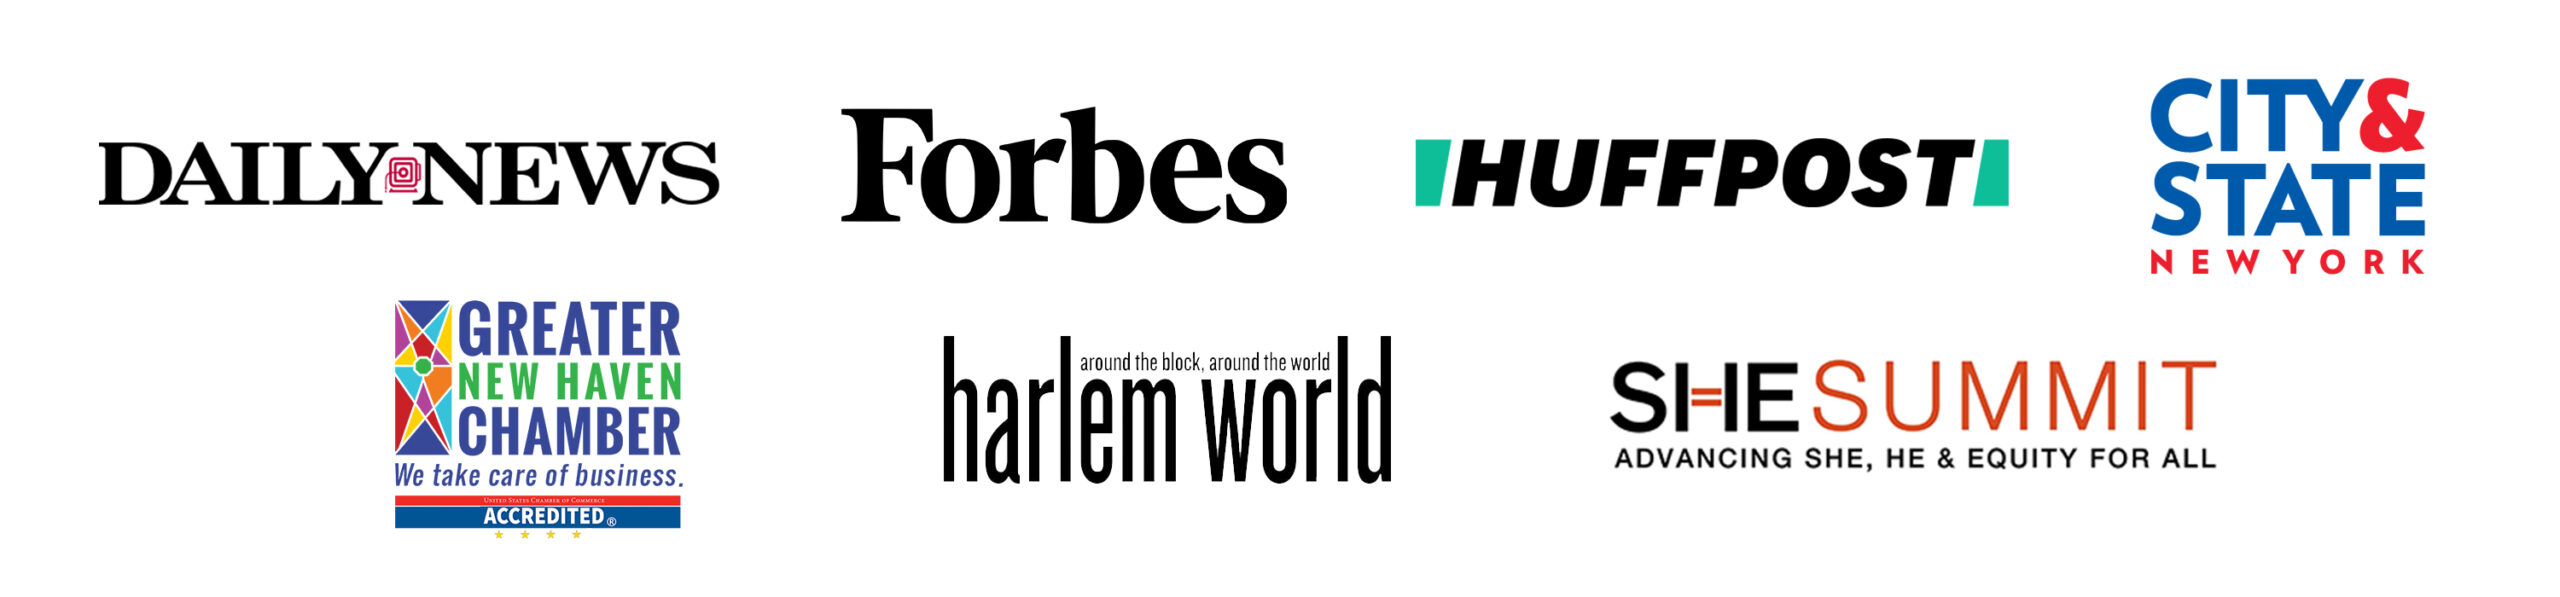 Press Logos: Daily News, Forbes, Huffpost, City & State New York